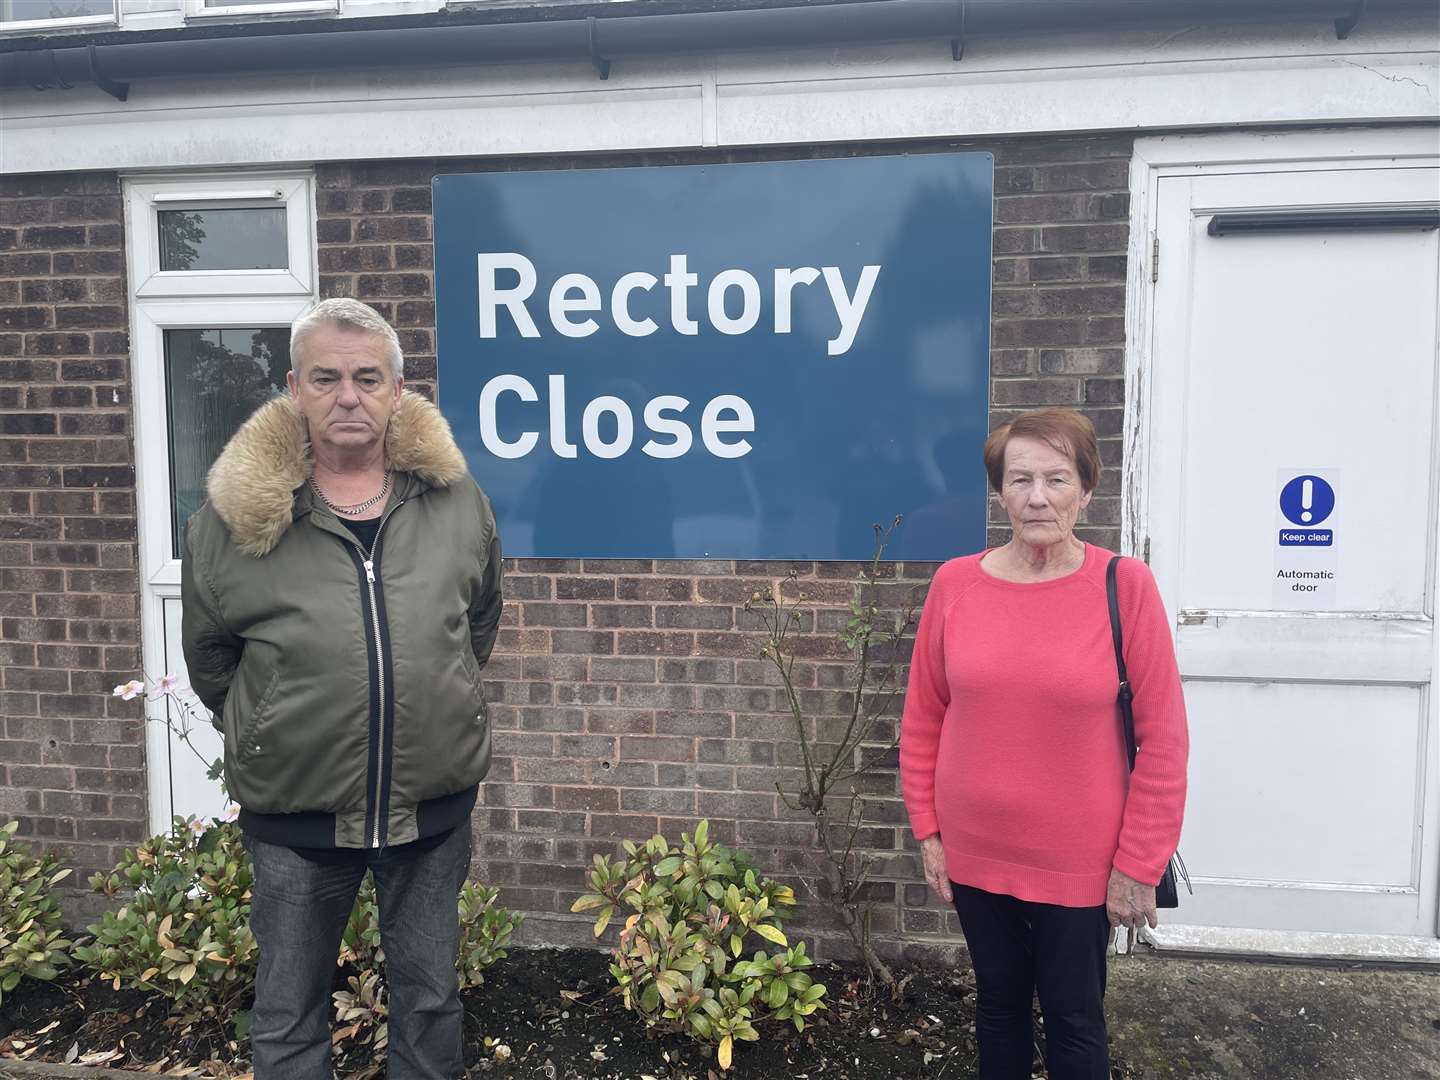 Half a dozen residents at Rectory Close in Snodland shared safety concerns about the access to the building and the ongoing yobs problem